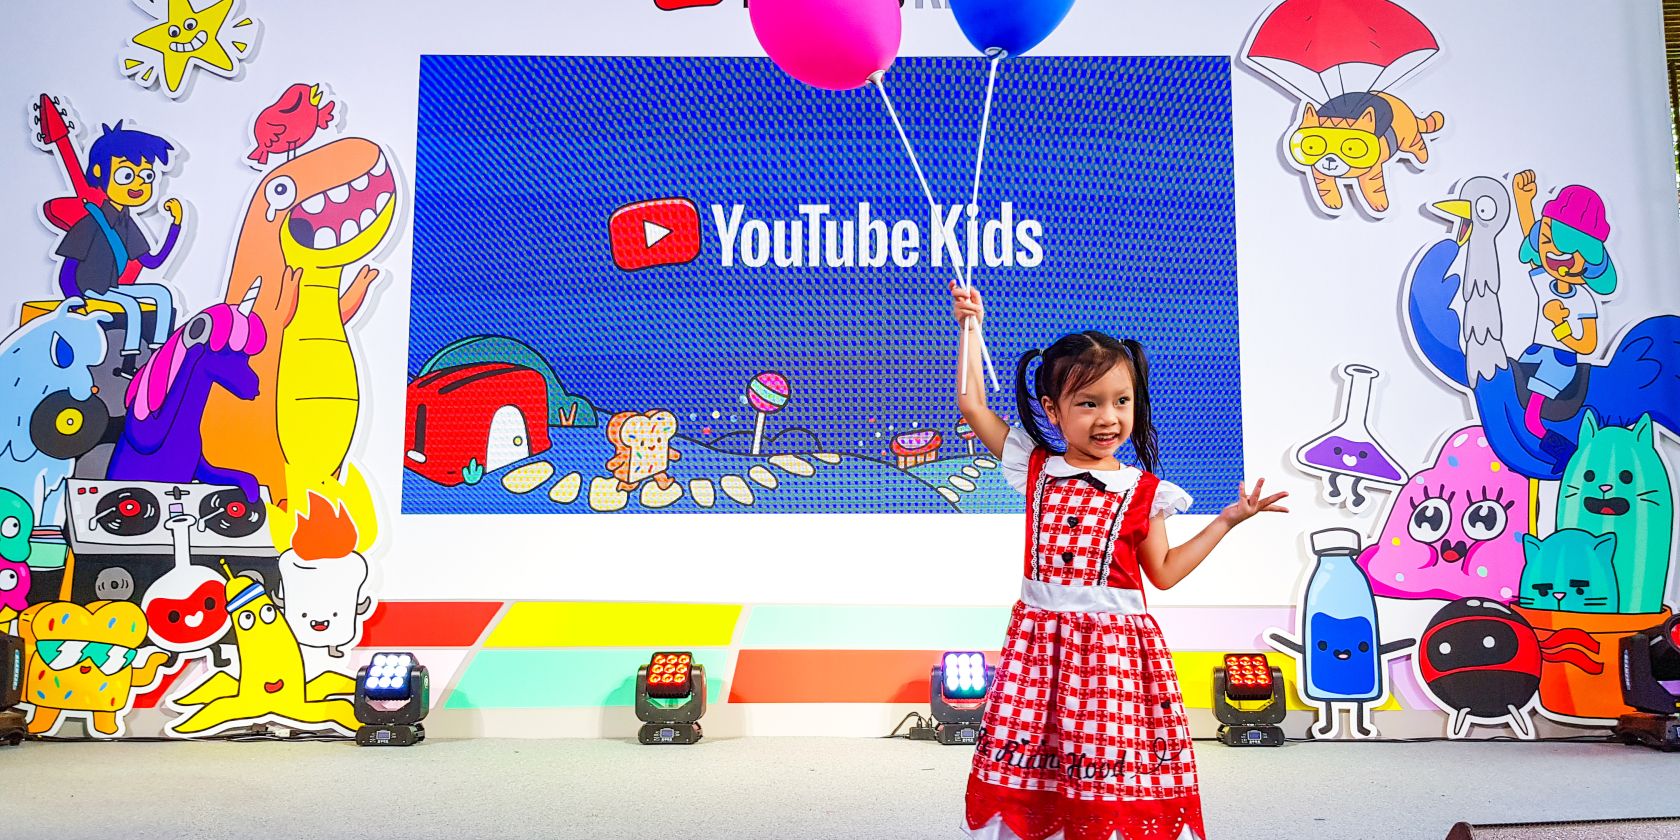 How to Block a Video or Channel on YouTube Kids